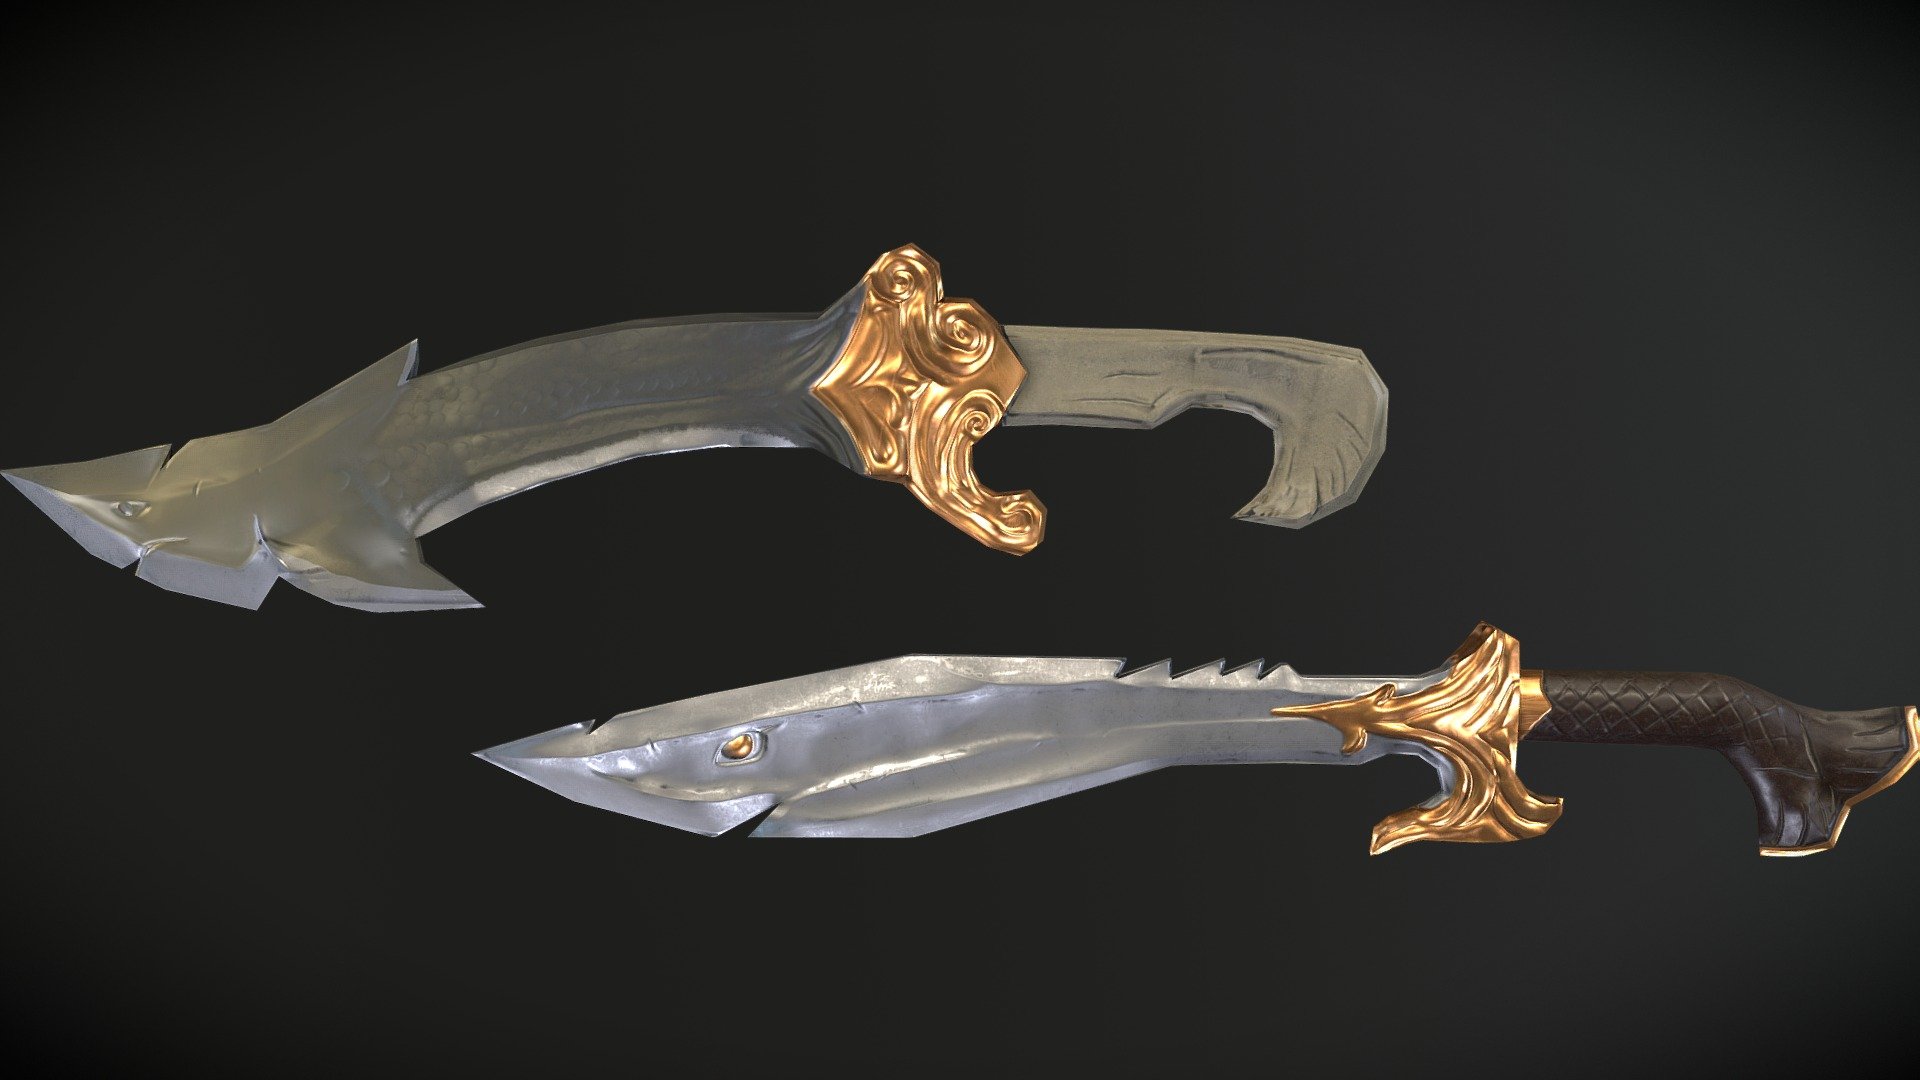 Set of shark blades that are part of weapon design concept set created by Manuel Gomez. This weapons were fun to create since they had such a unique design 3d model